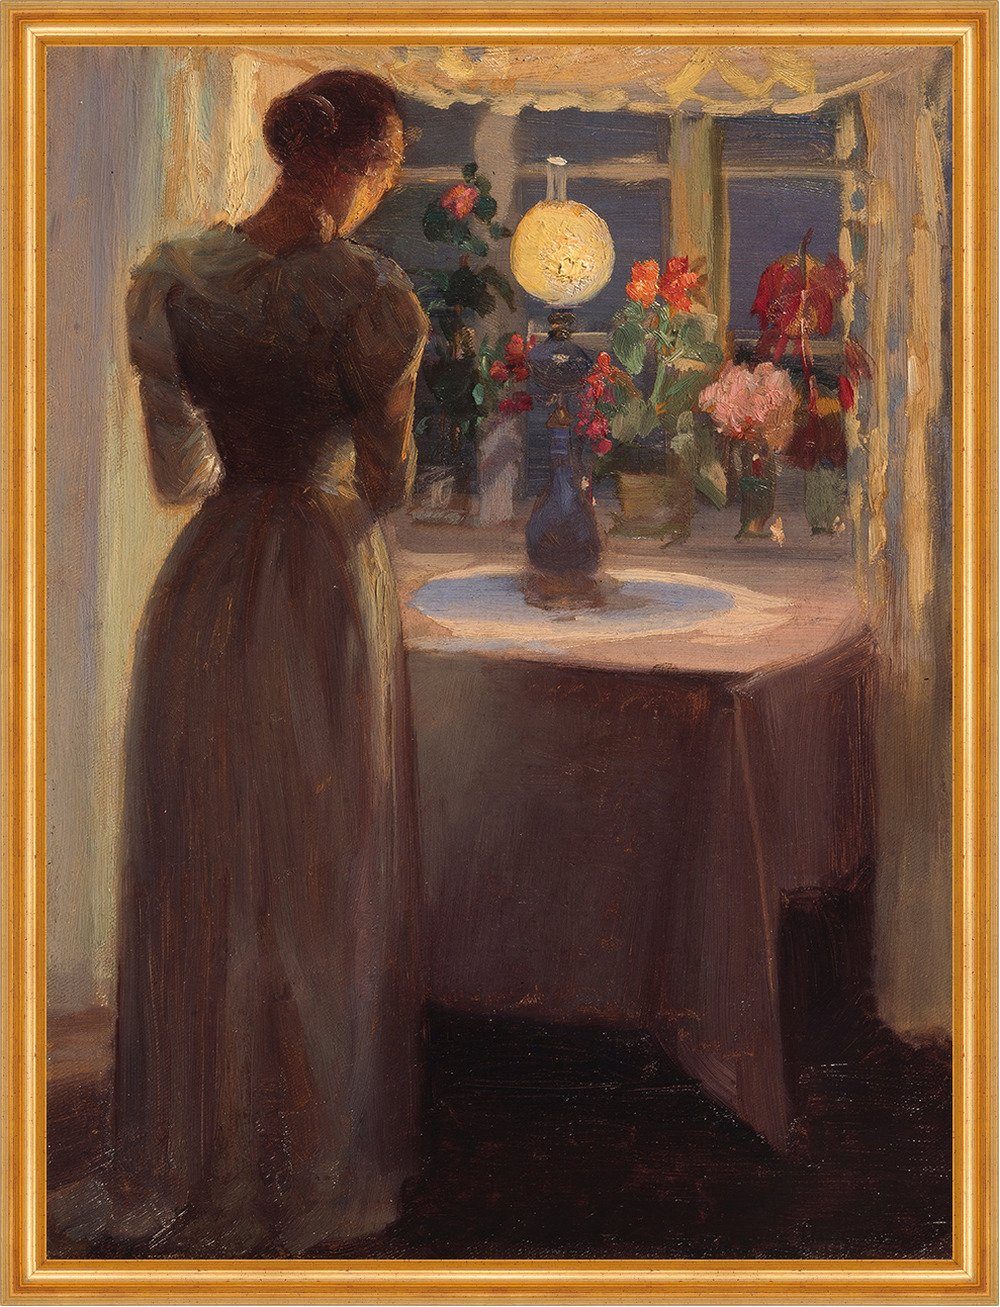 Kunstdruck Young girl in front of a lighted lamp Anna Ancher Licht B A2 00519 Ger, (1 St)